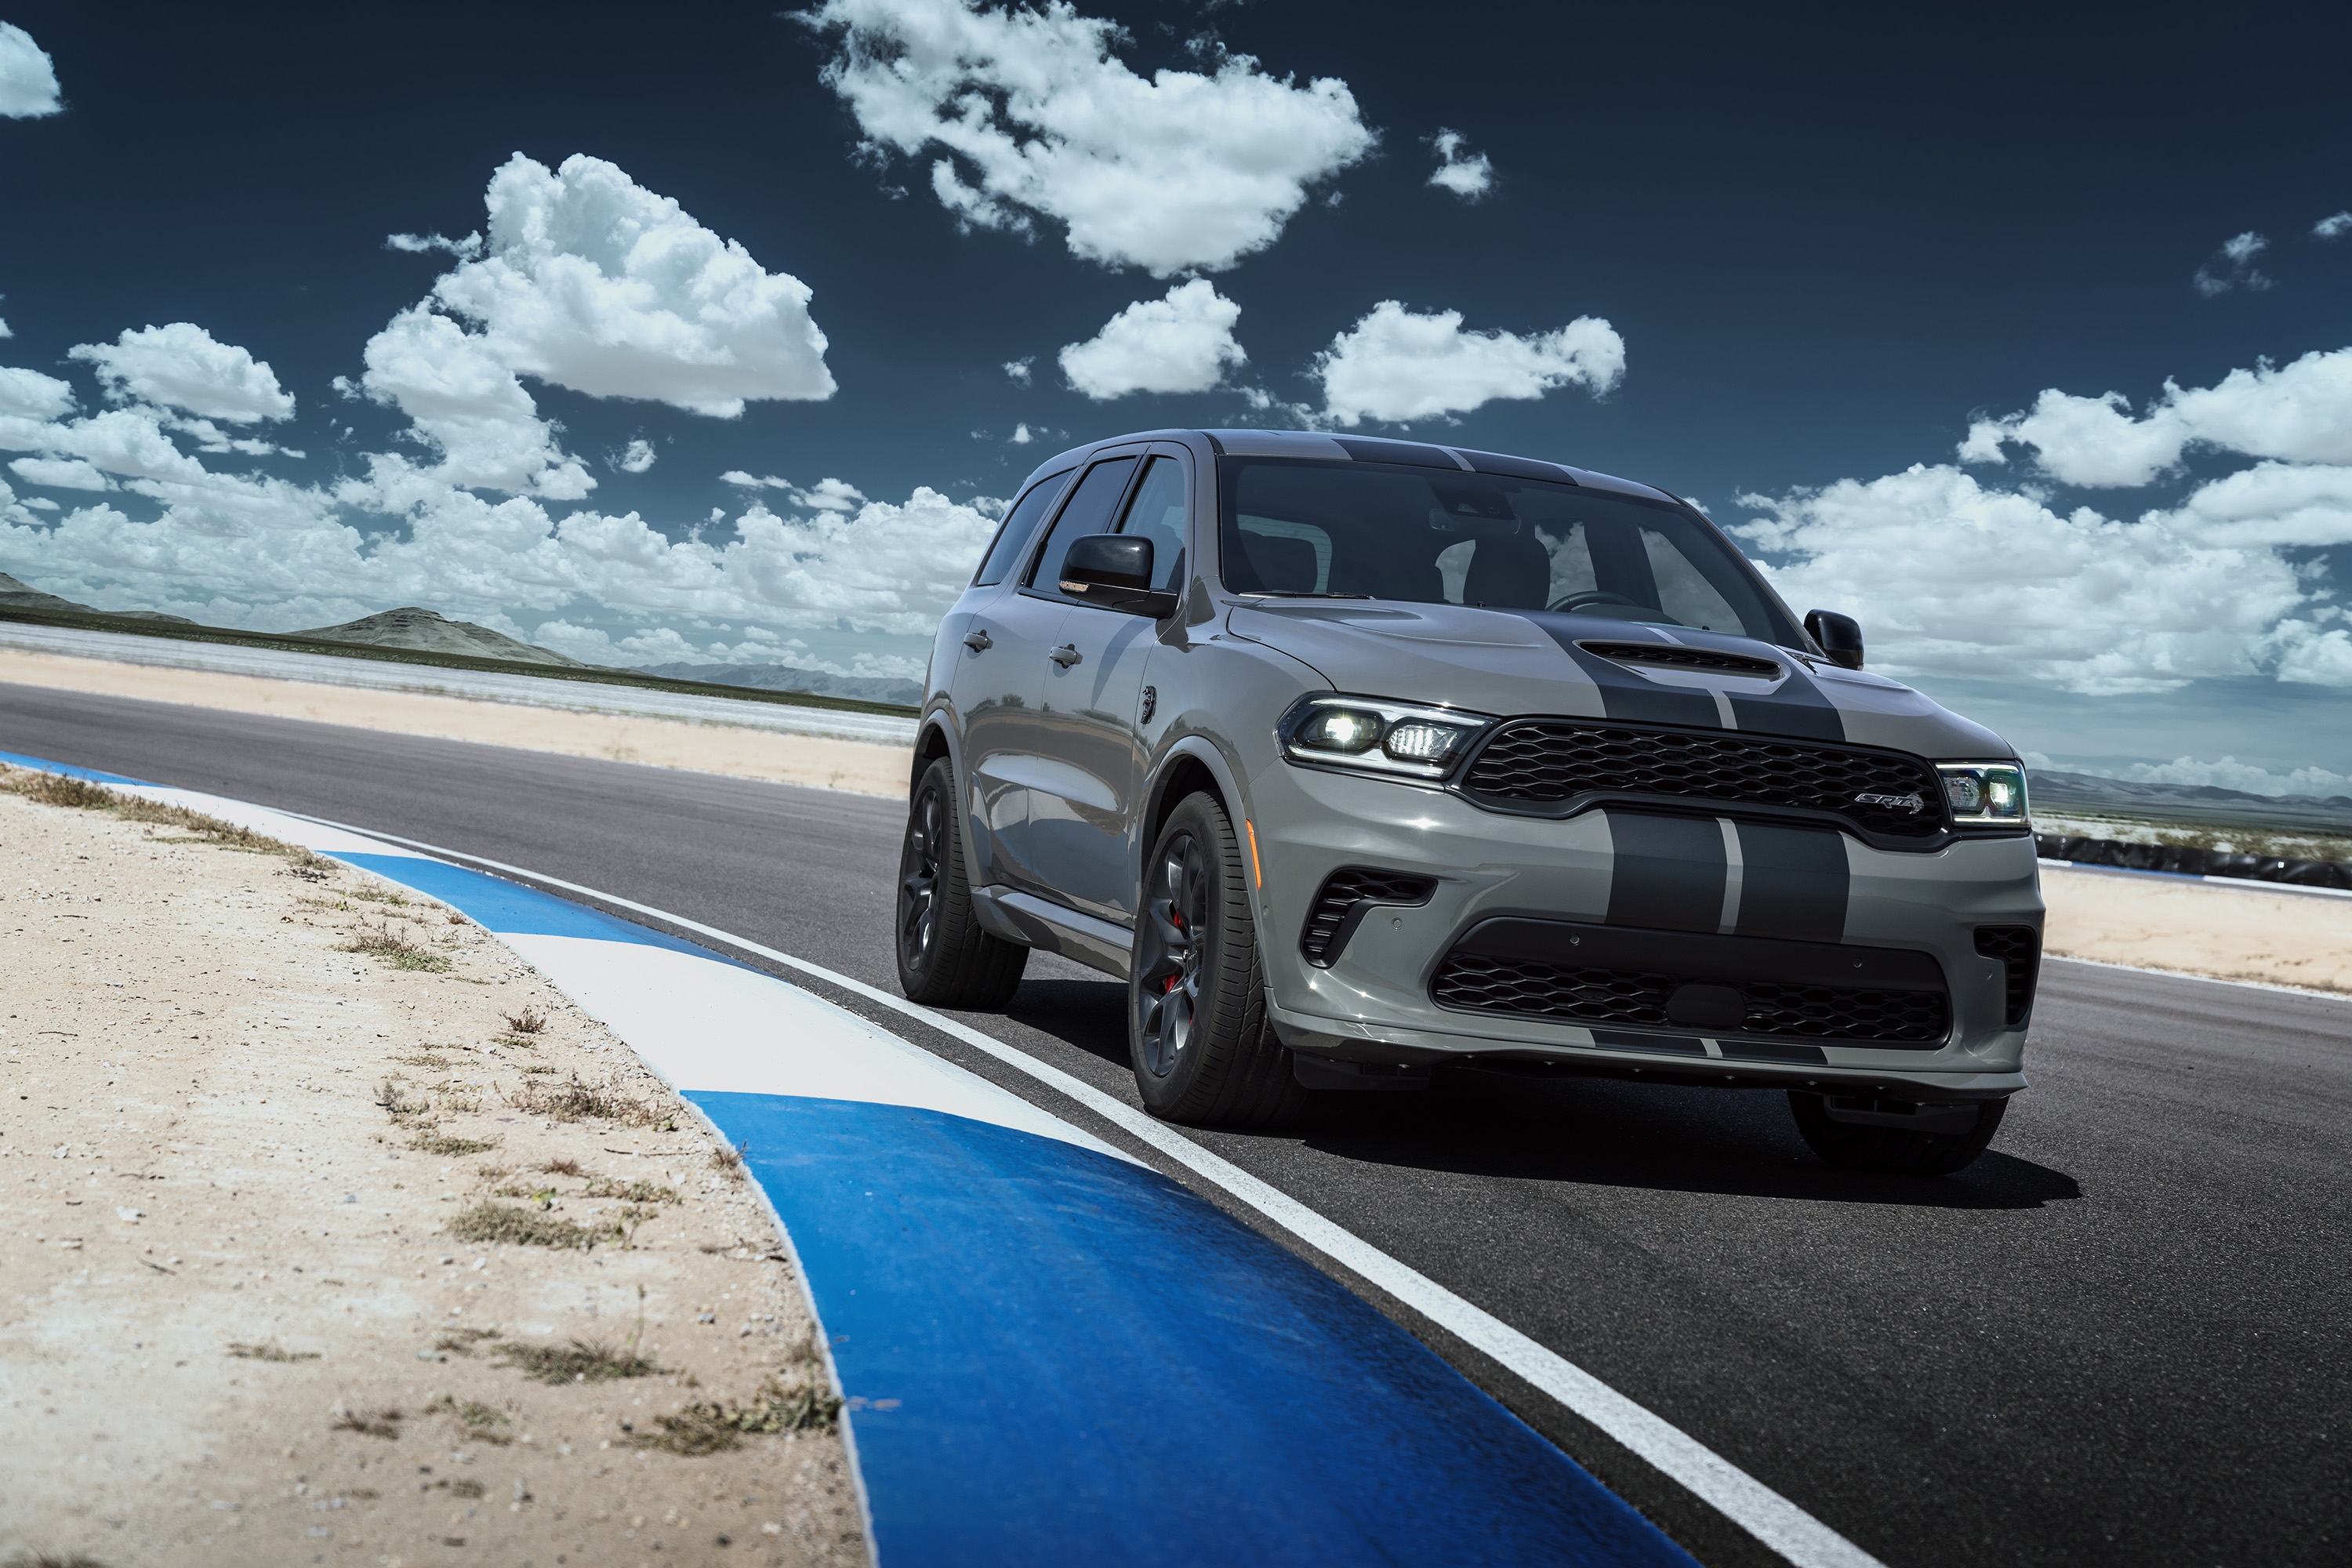 2021 Dodge Durango SRT Hellcat Now Available to Order